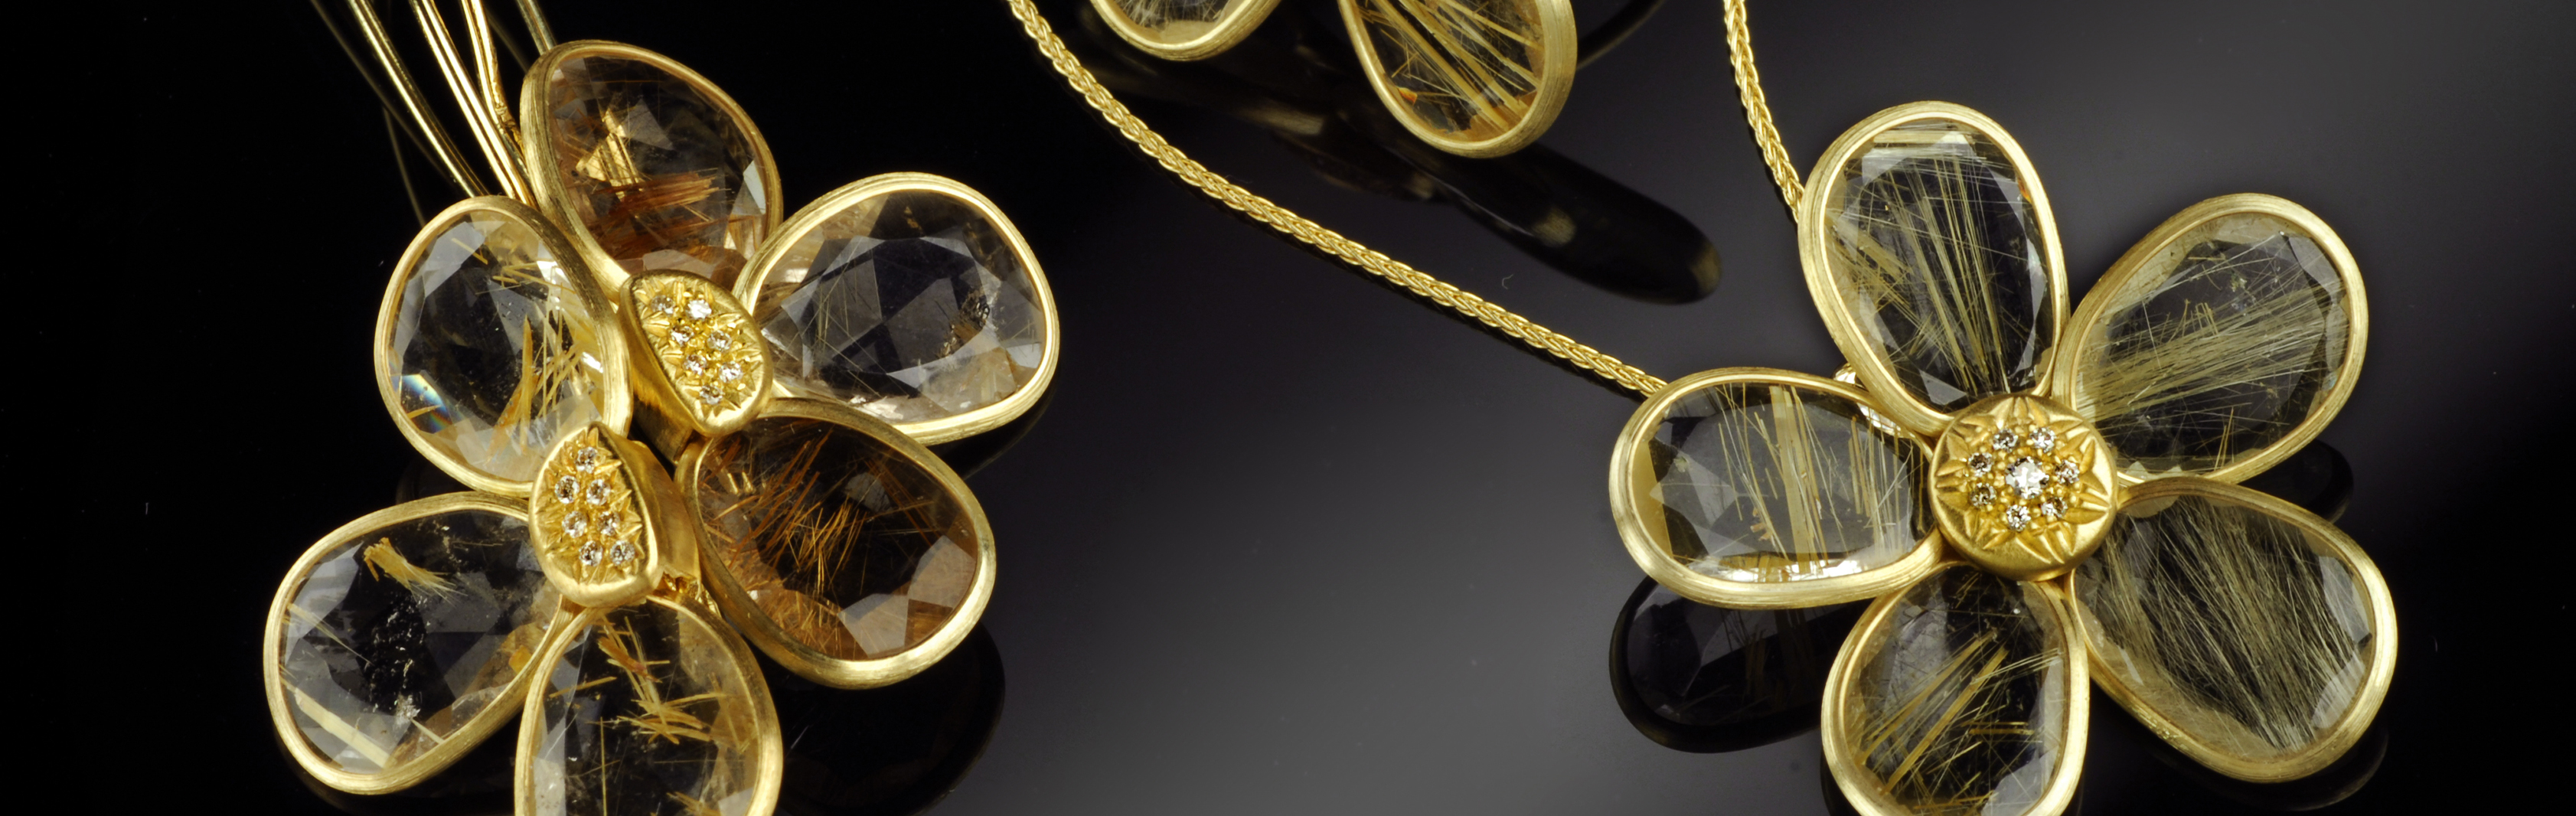 Golden Flower Collection | 14K Gold Jewelry with Rutile Quartz and Diamonds